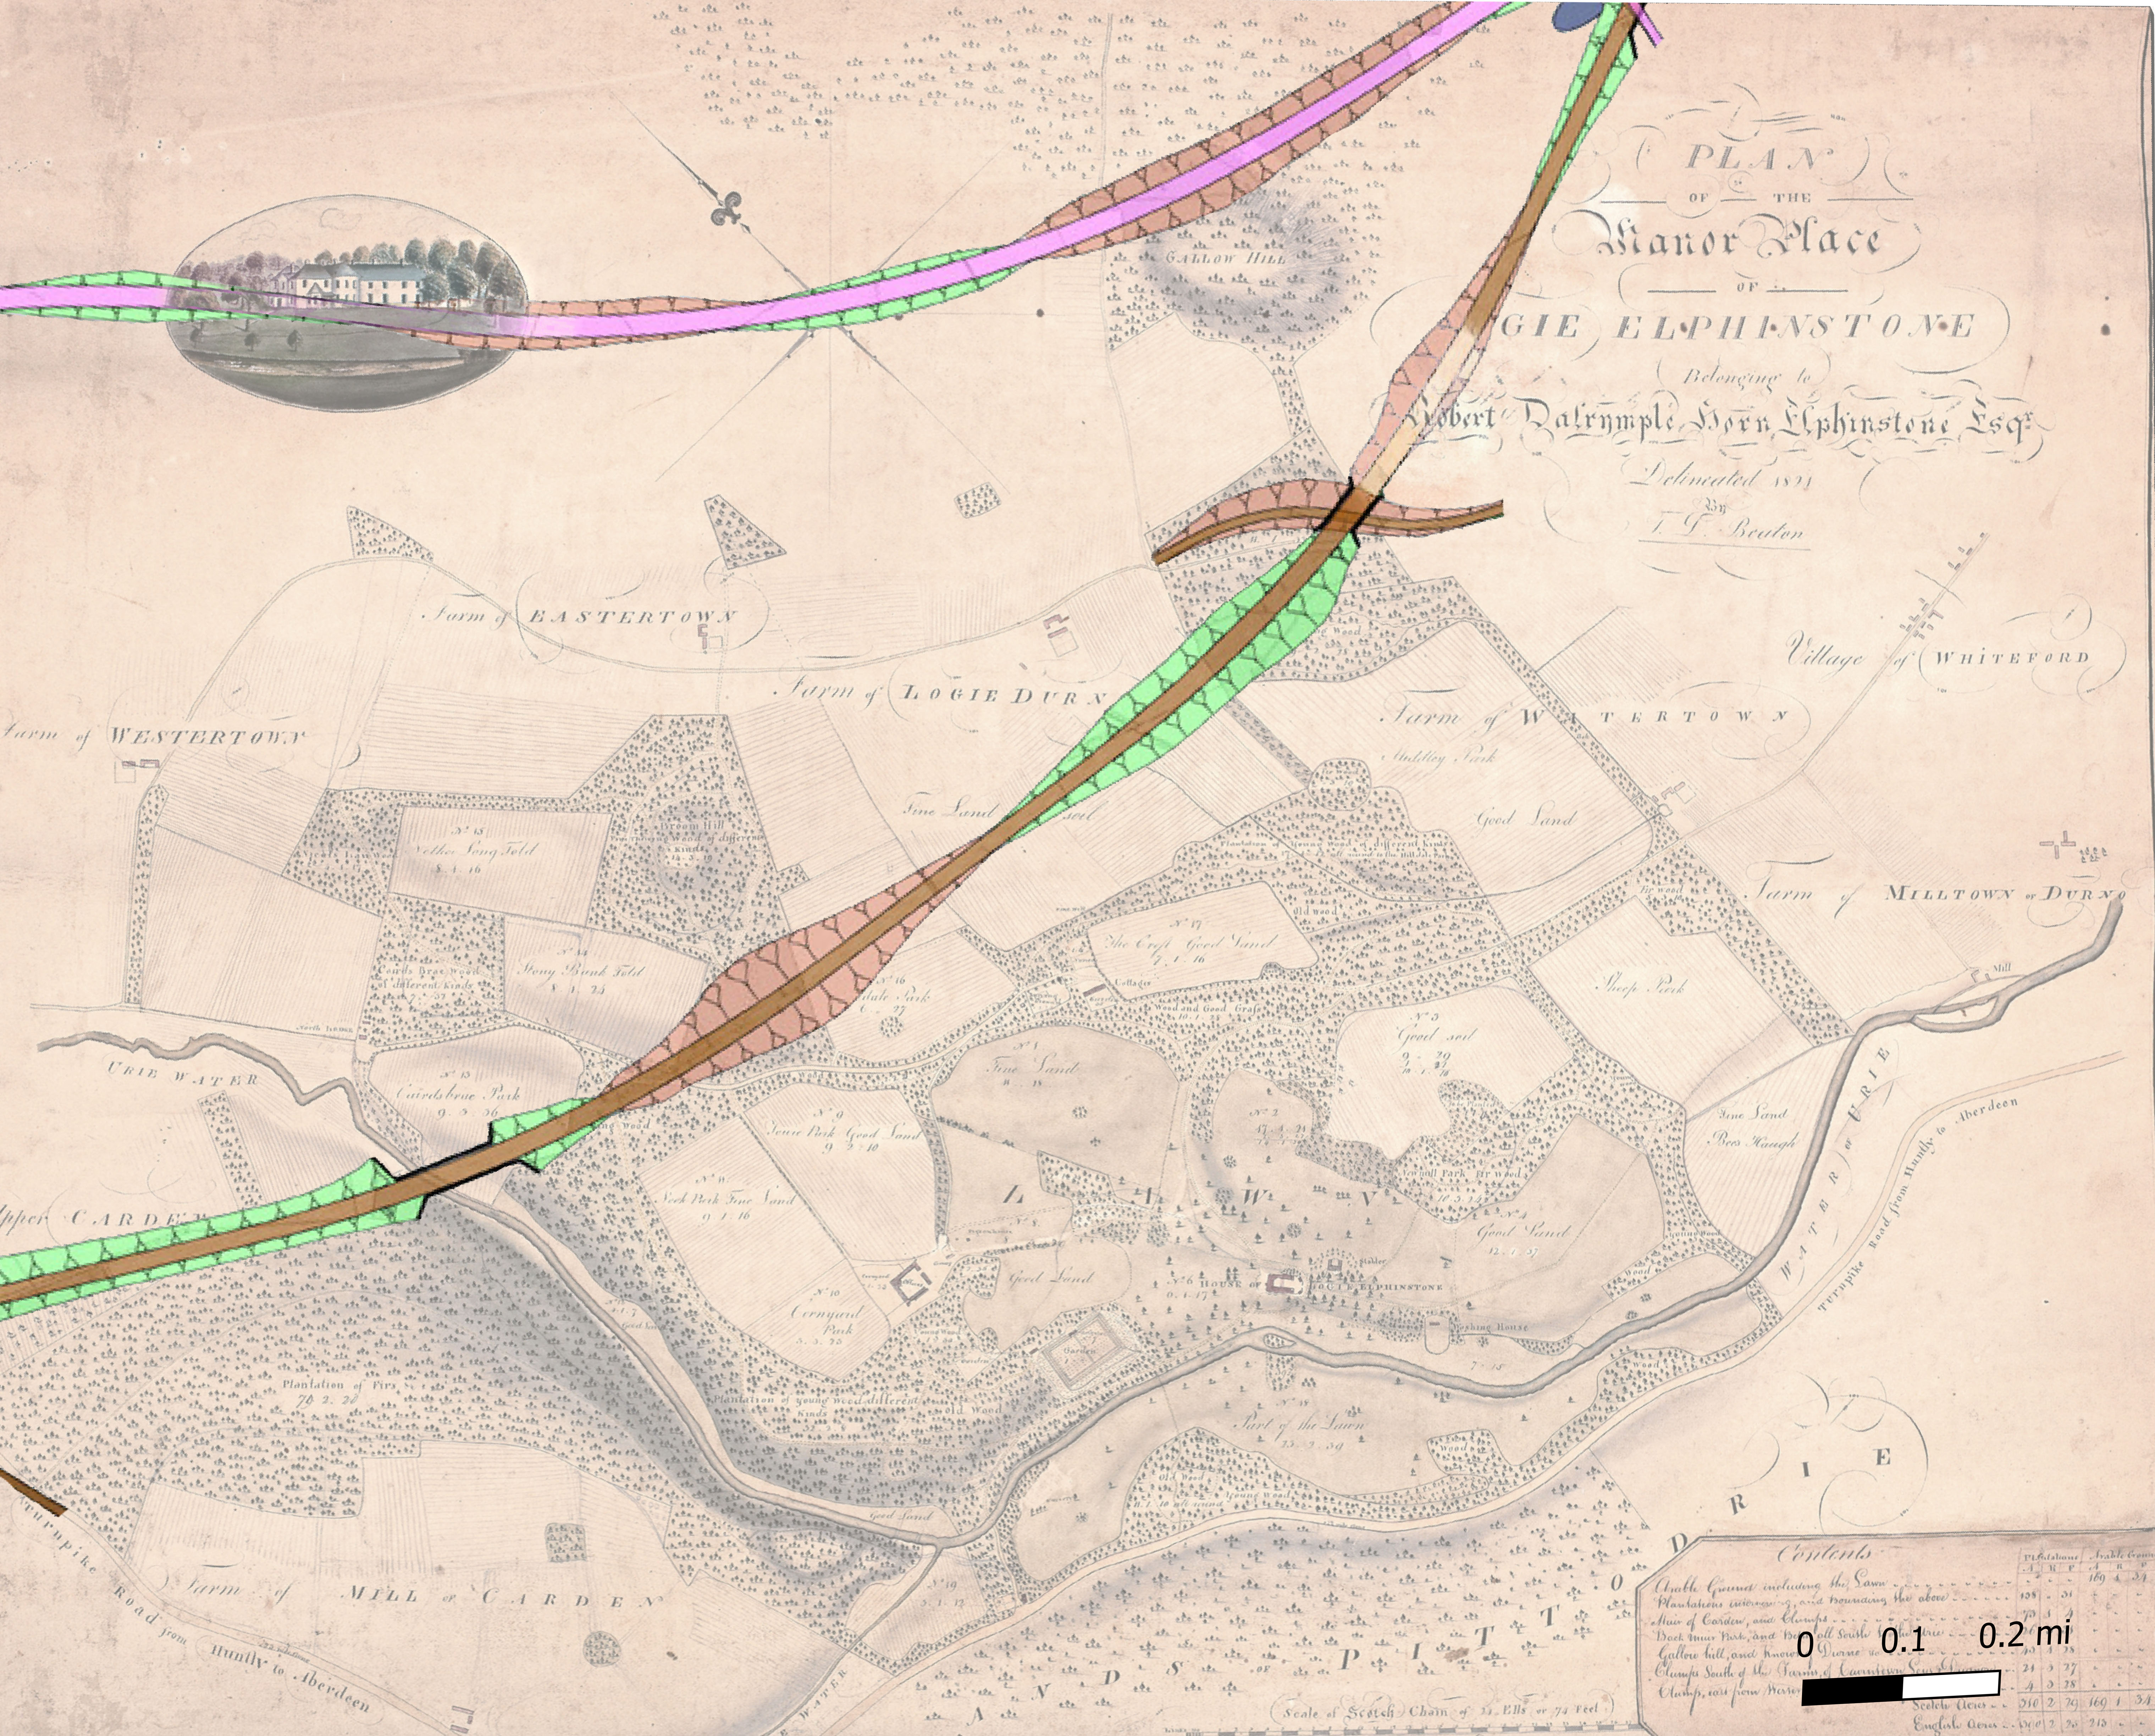 The group has overlayed the modern dualling proposals with estate maps dating back to 1821.